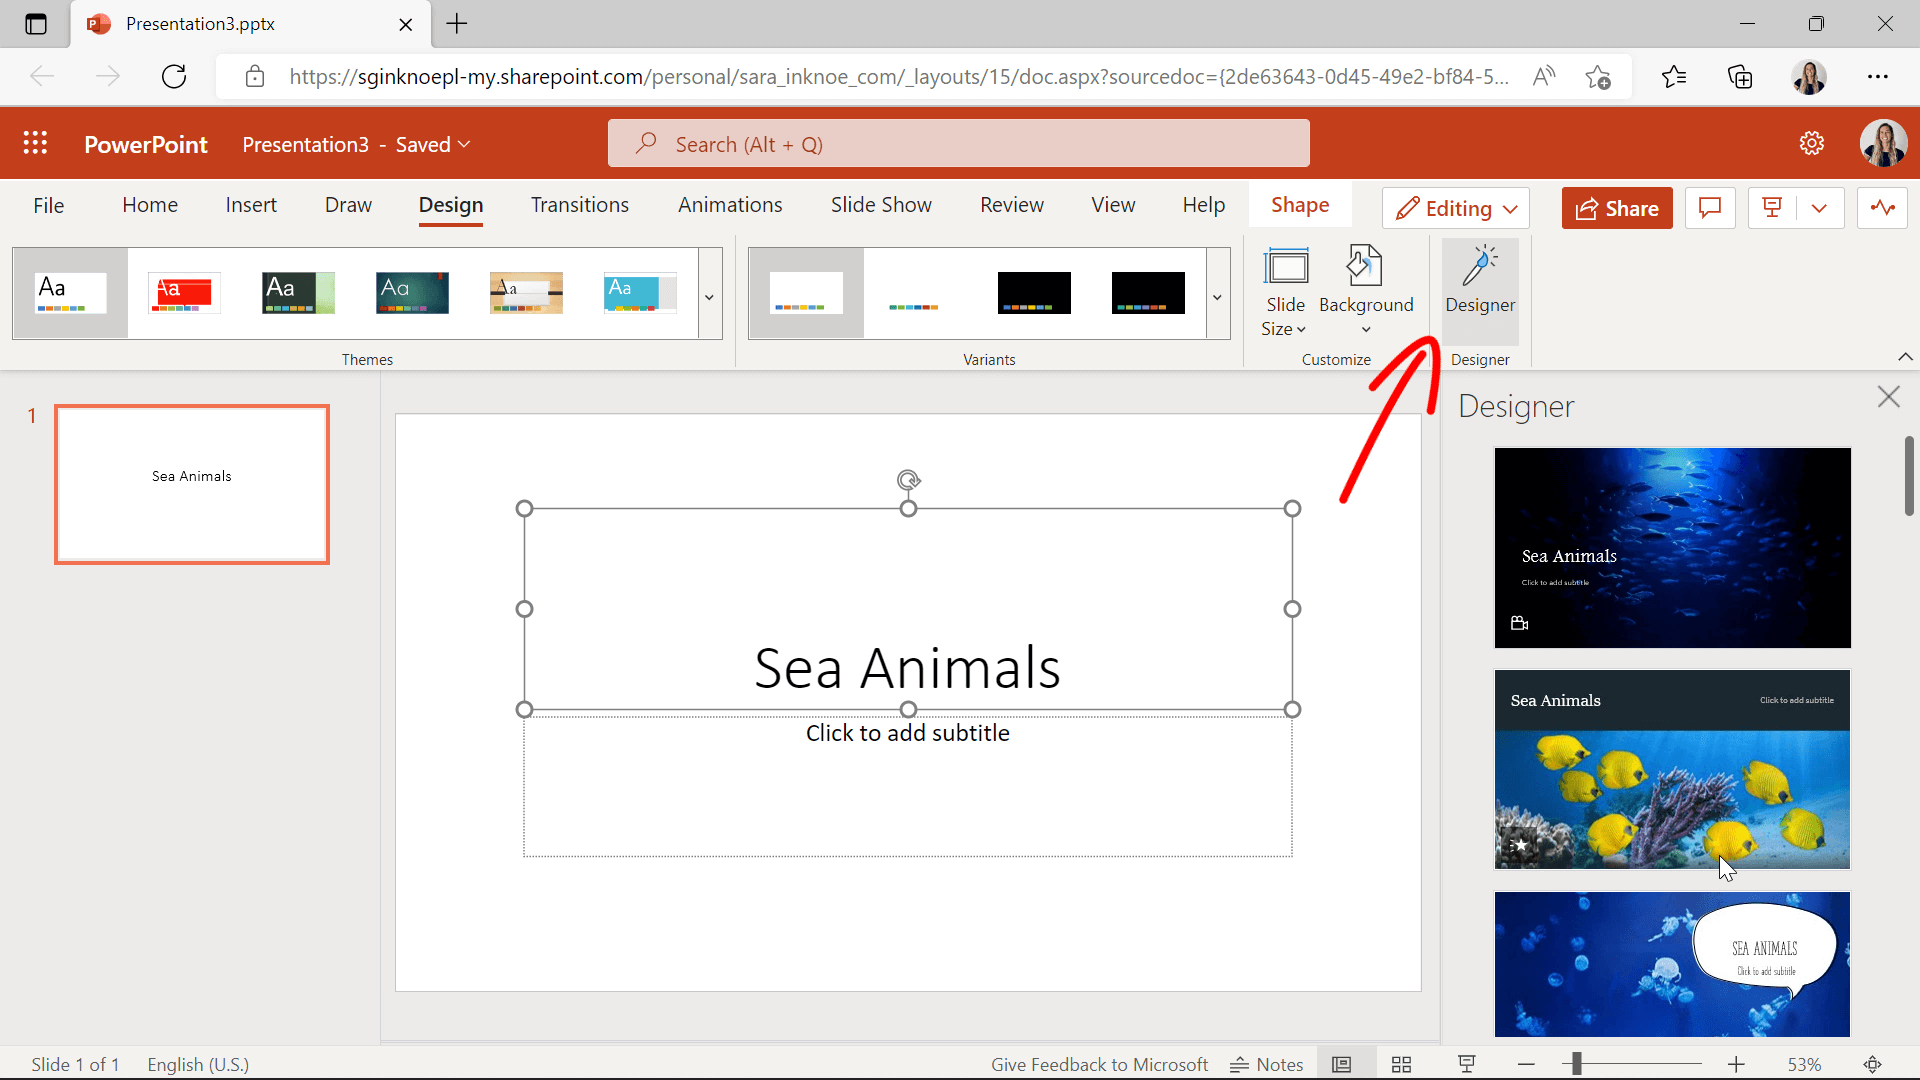 PowerPoint tips for the Designer feature
